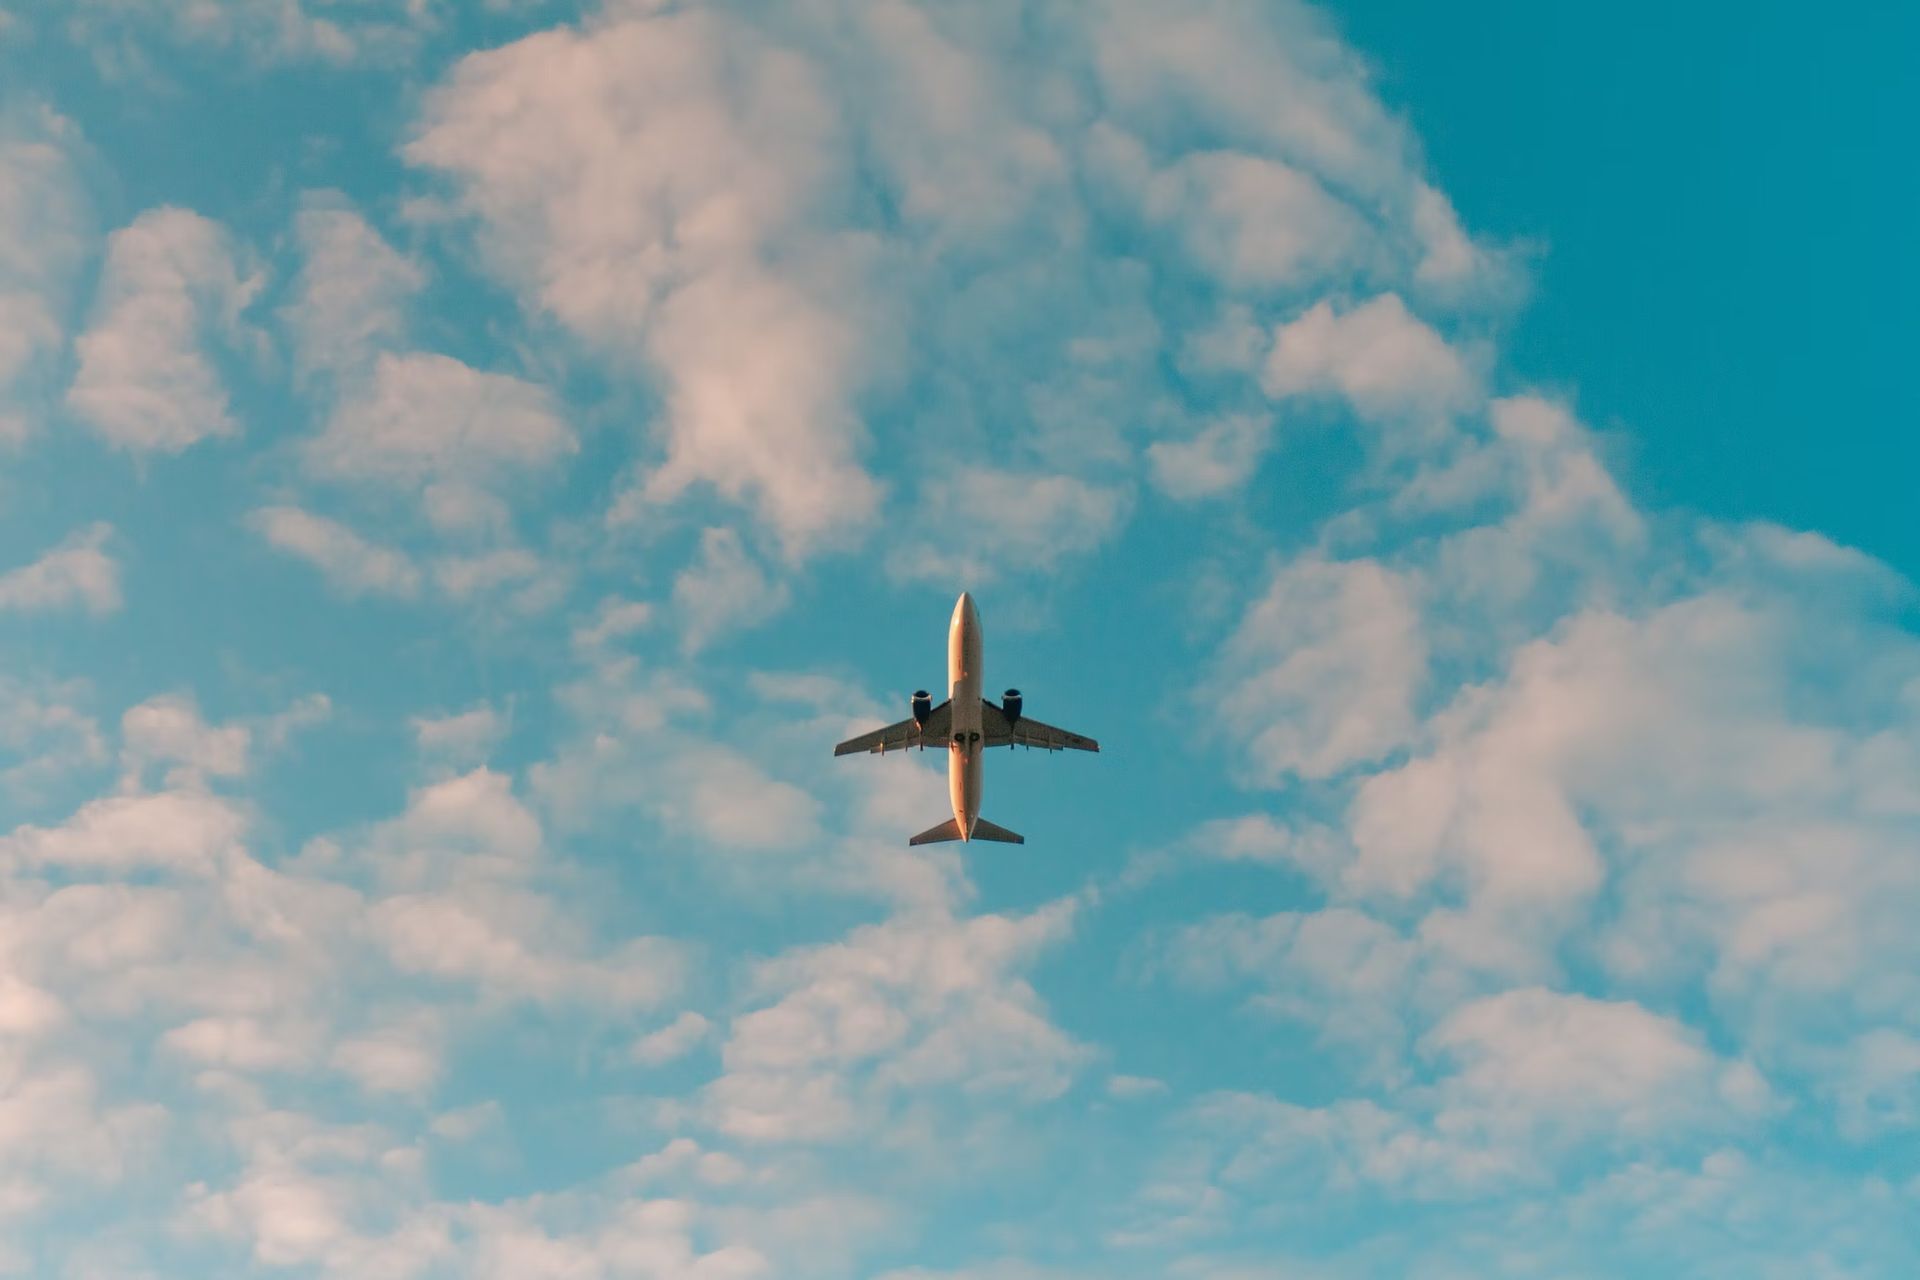 A Team Of Researchers At Carnegie Mellon University Believe They Have Developed The First Ai Pilot That Enables Autonomous Aircraft To Navigate Crowded Airspace.